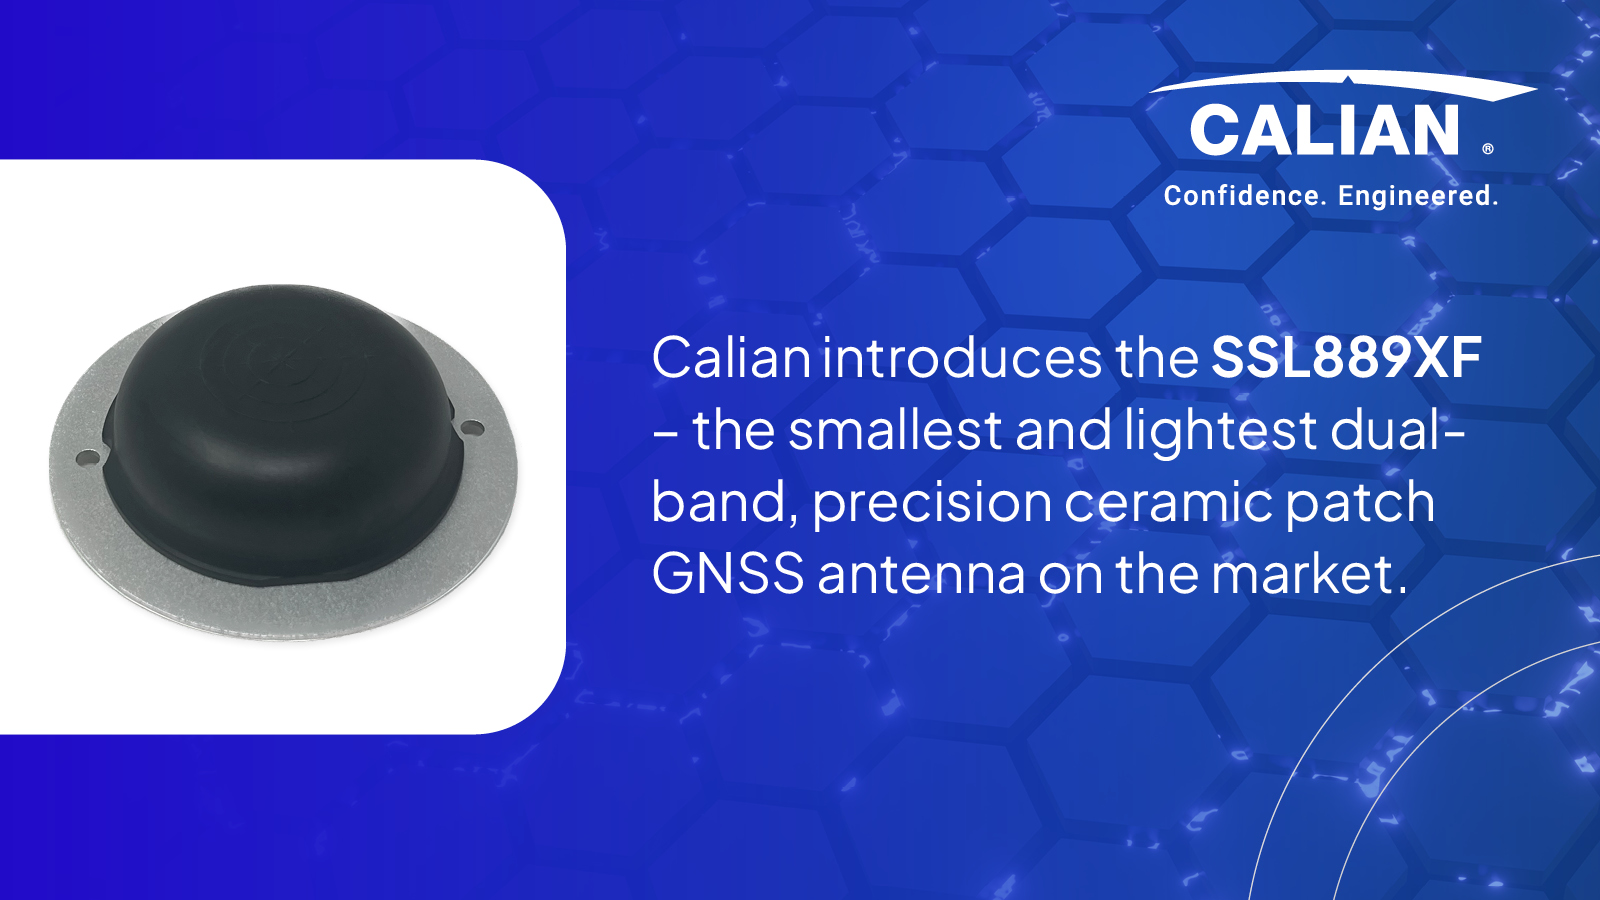 Calian introduces the SSL889XF – the smallest and lightest dual-band, precision ceramic patch GNSS antenna on the market. 